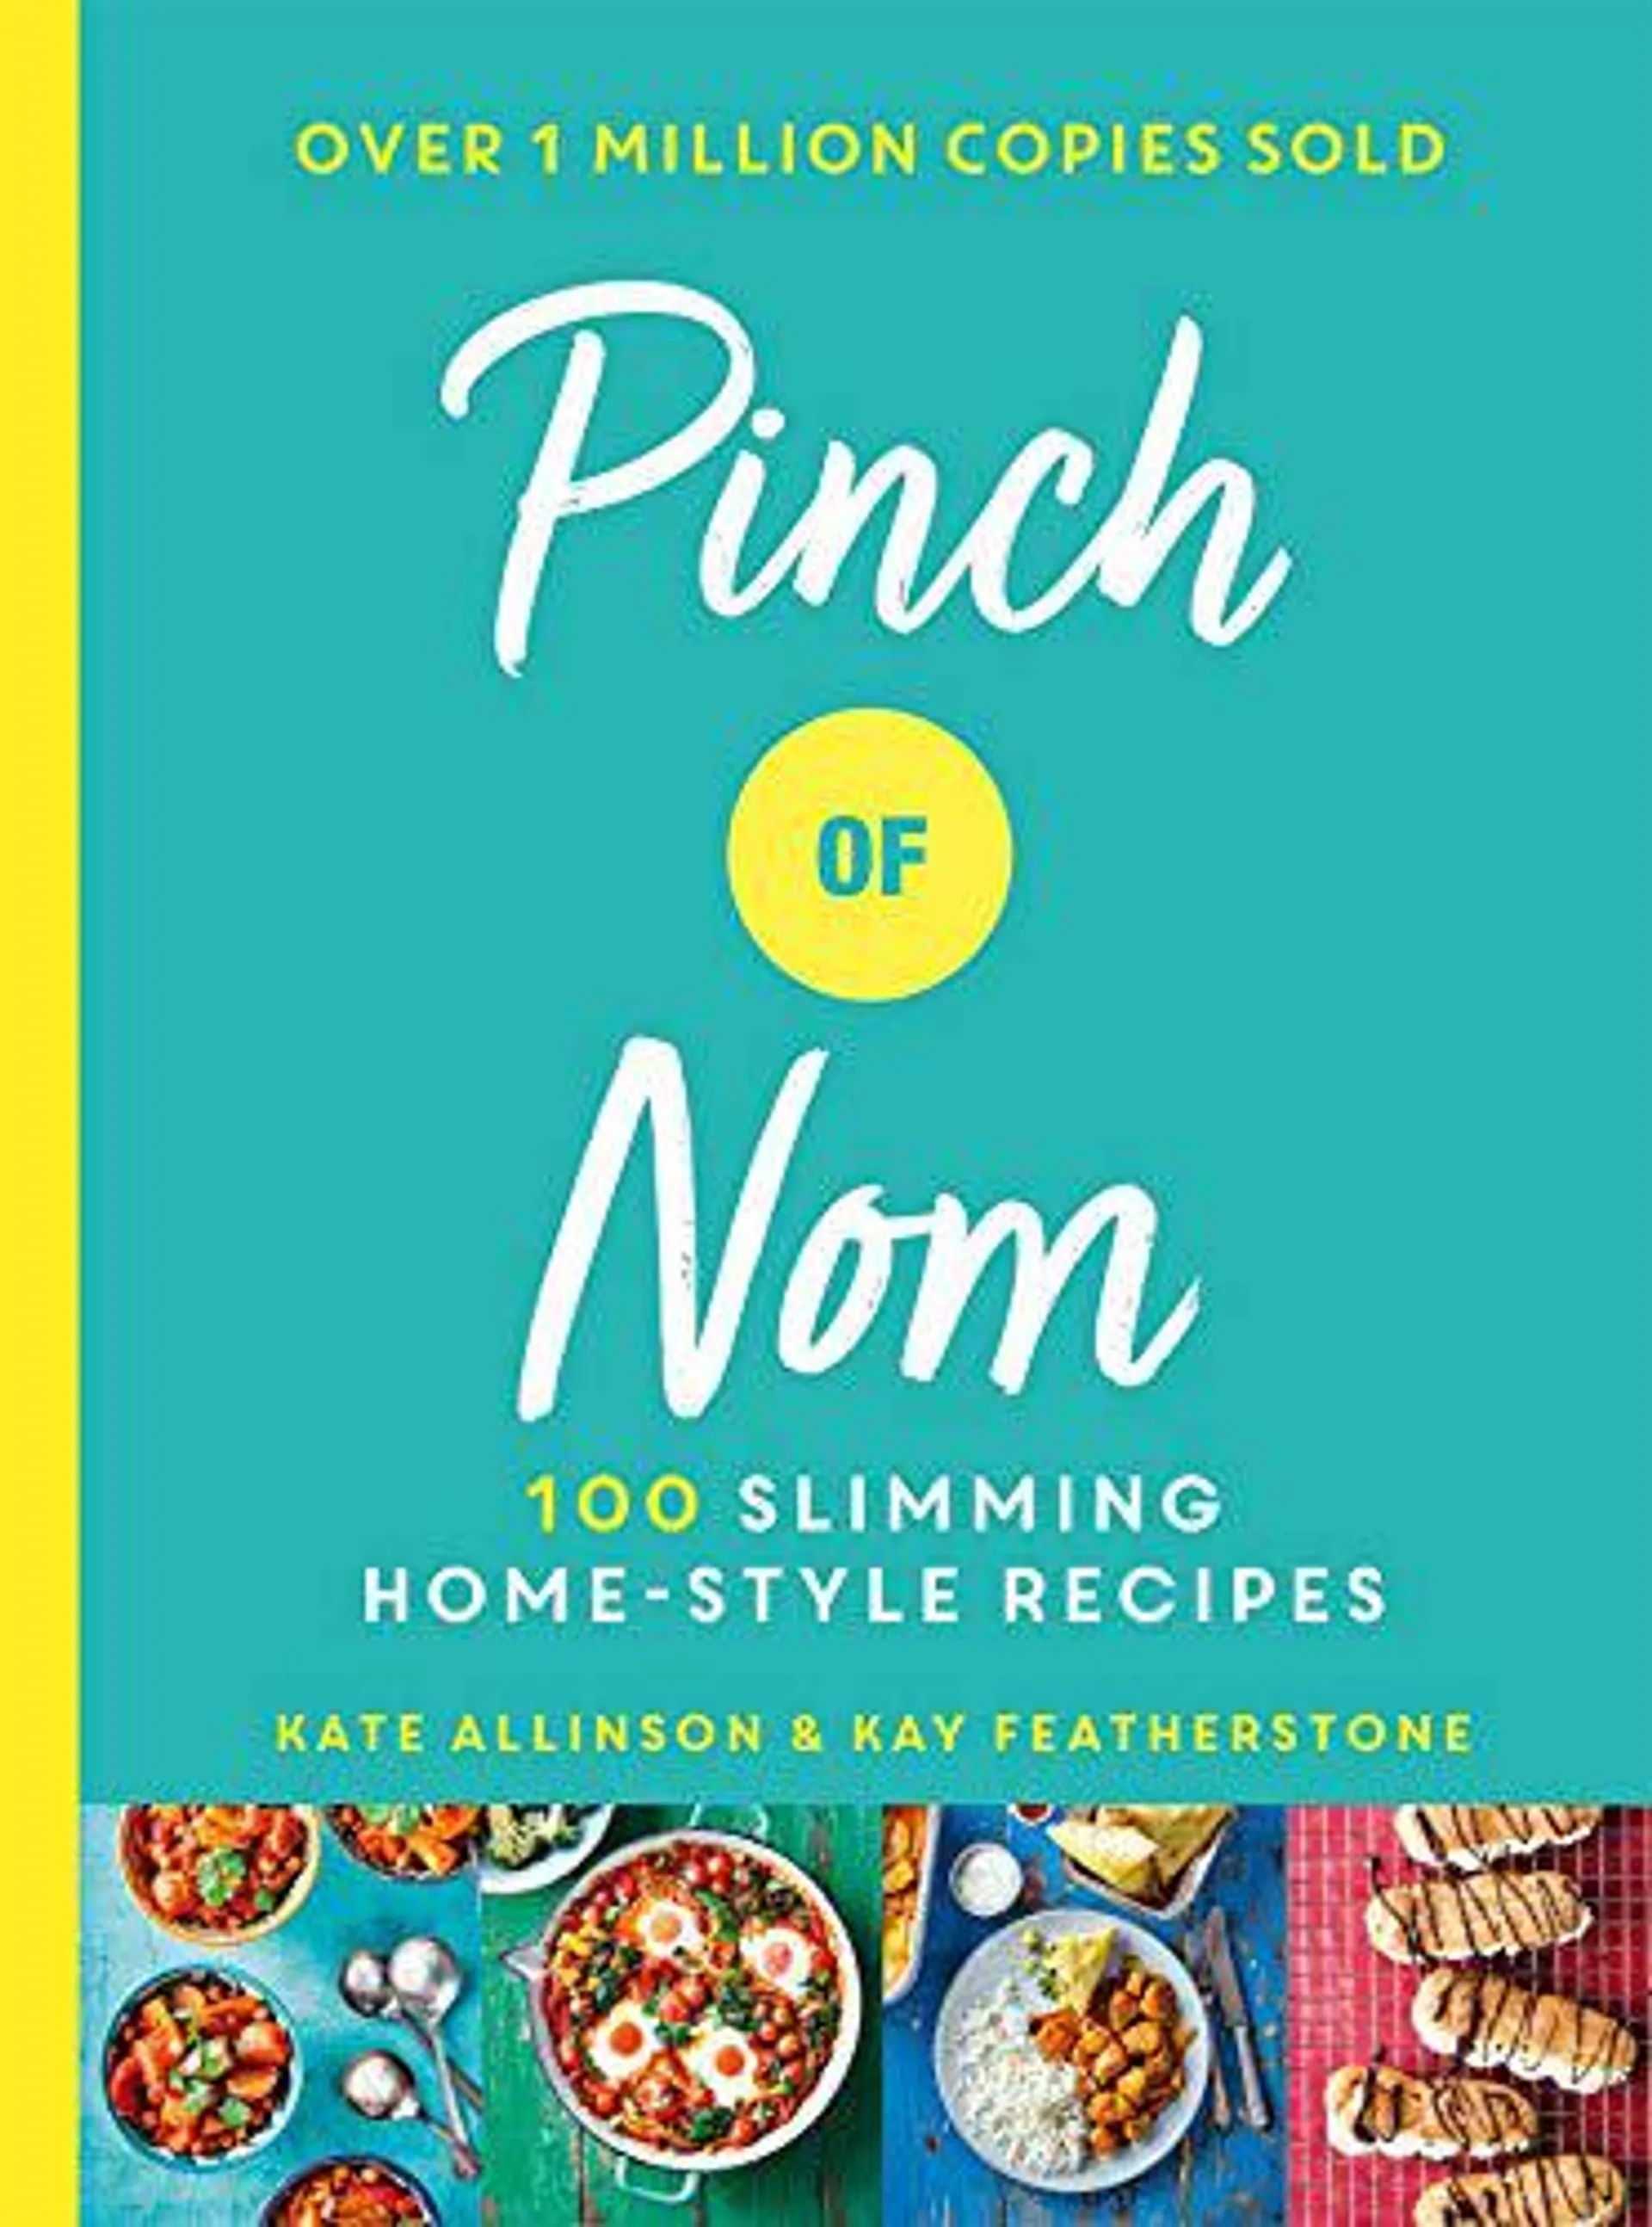 Pinch of Nom by Kay Featherstone